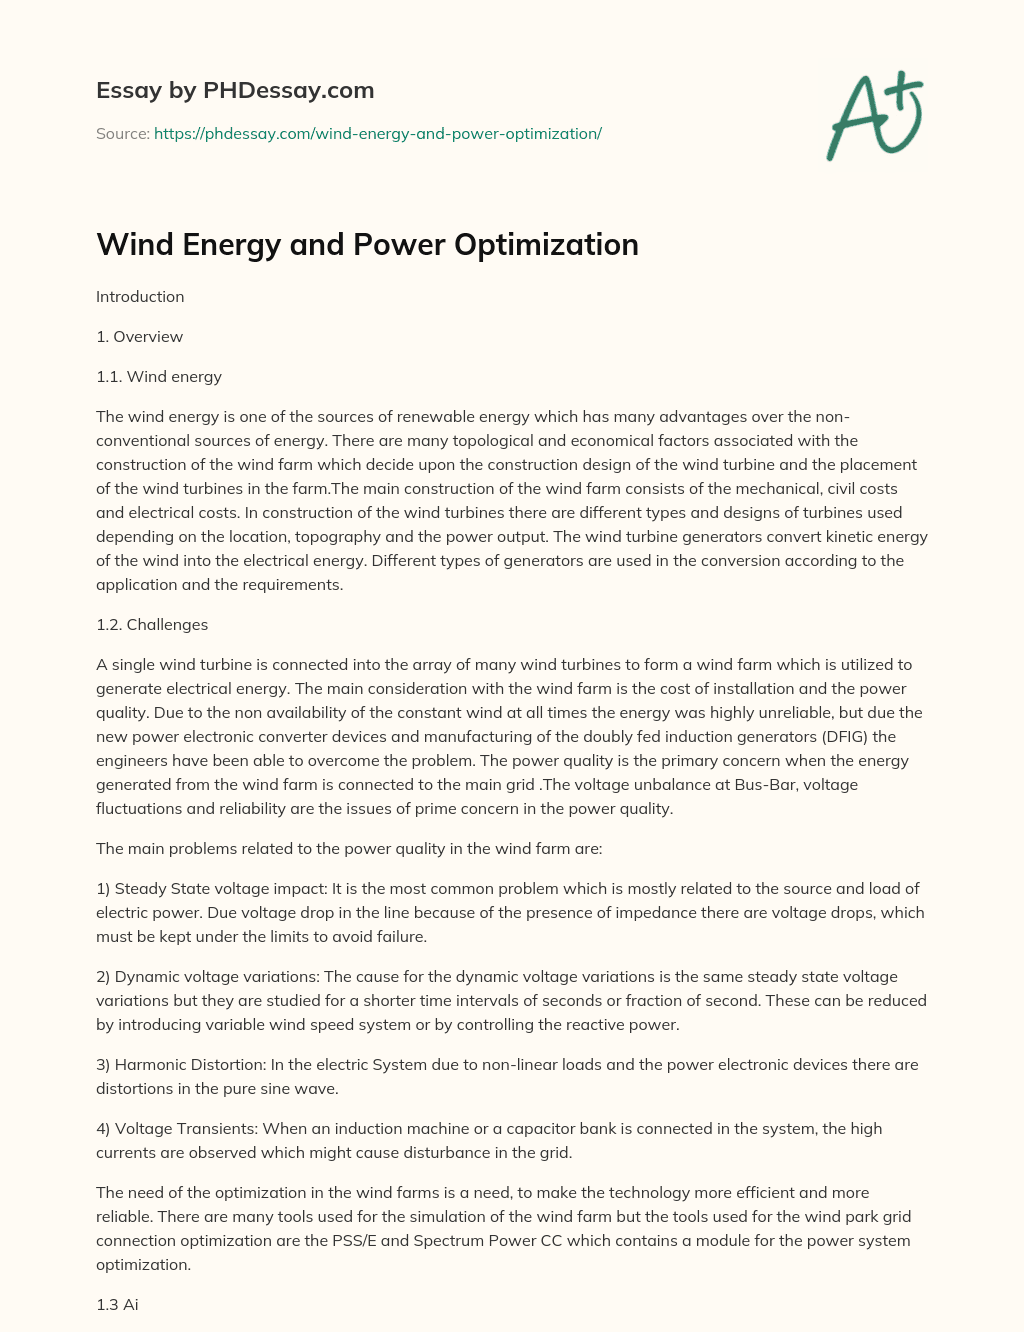 Wind Energy and Power Optimization essay